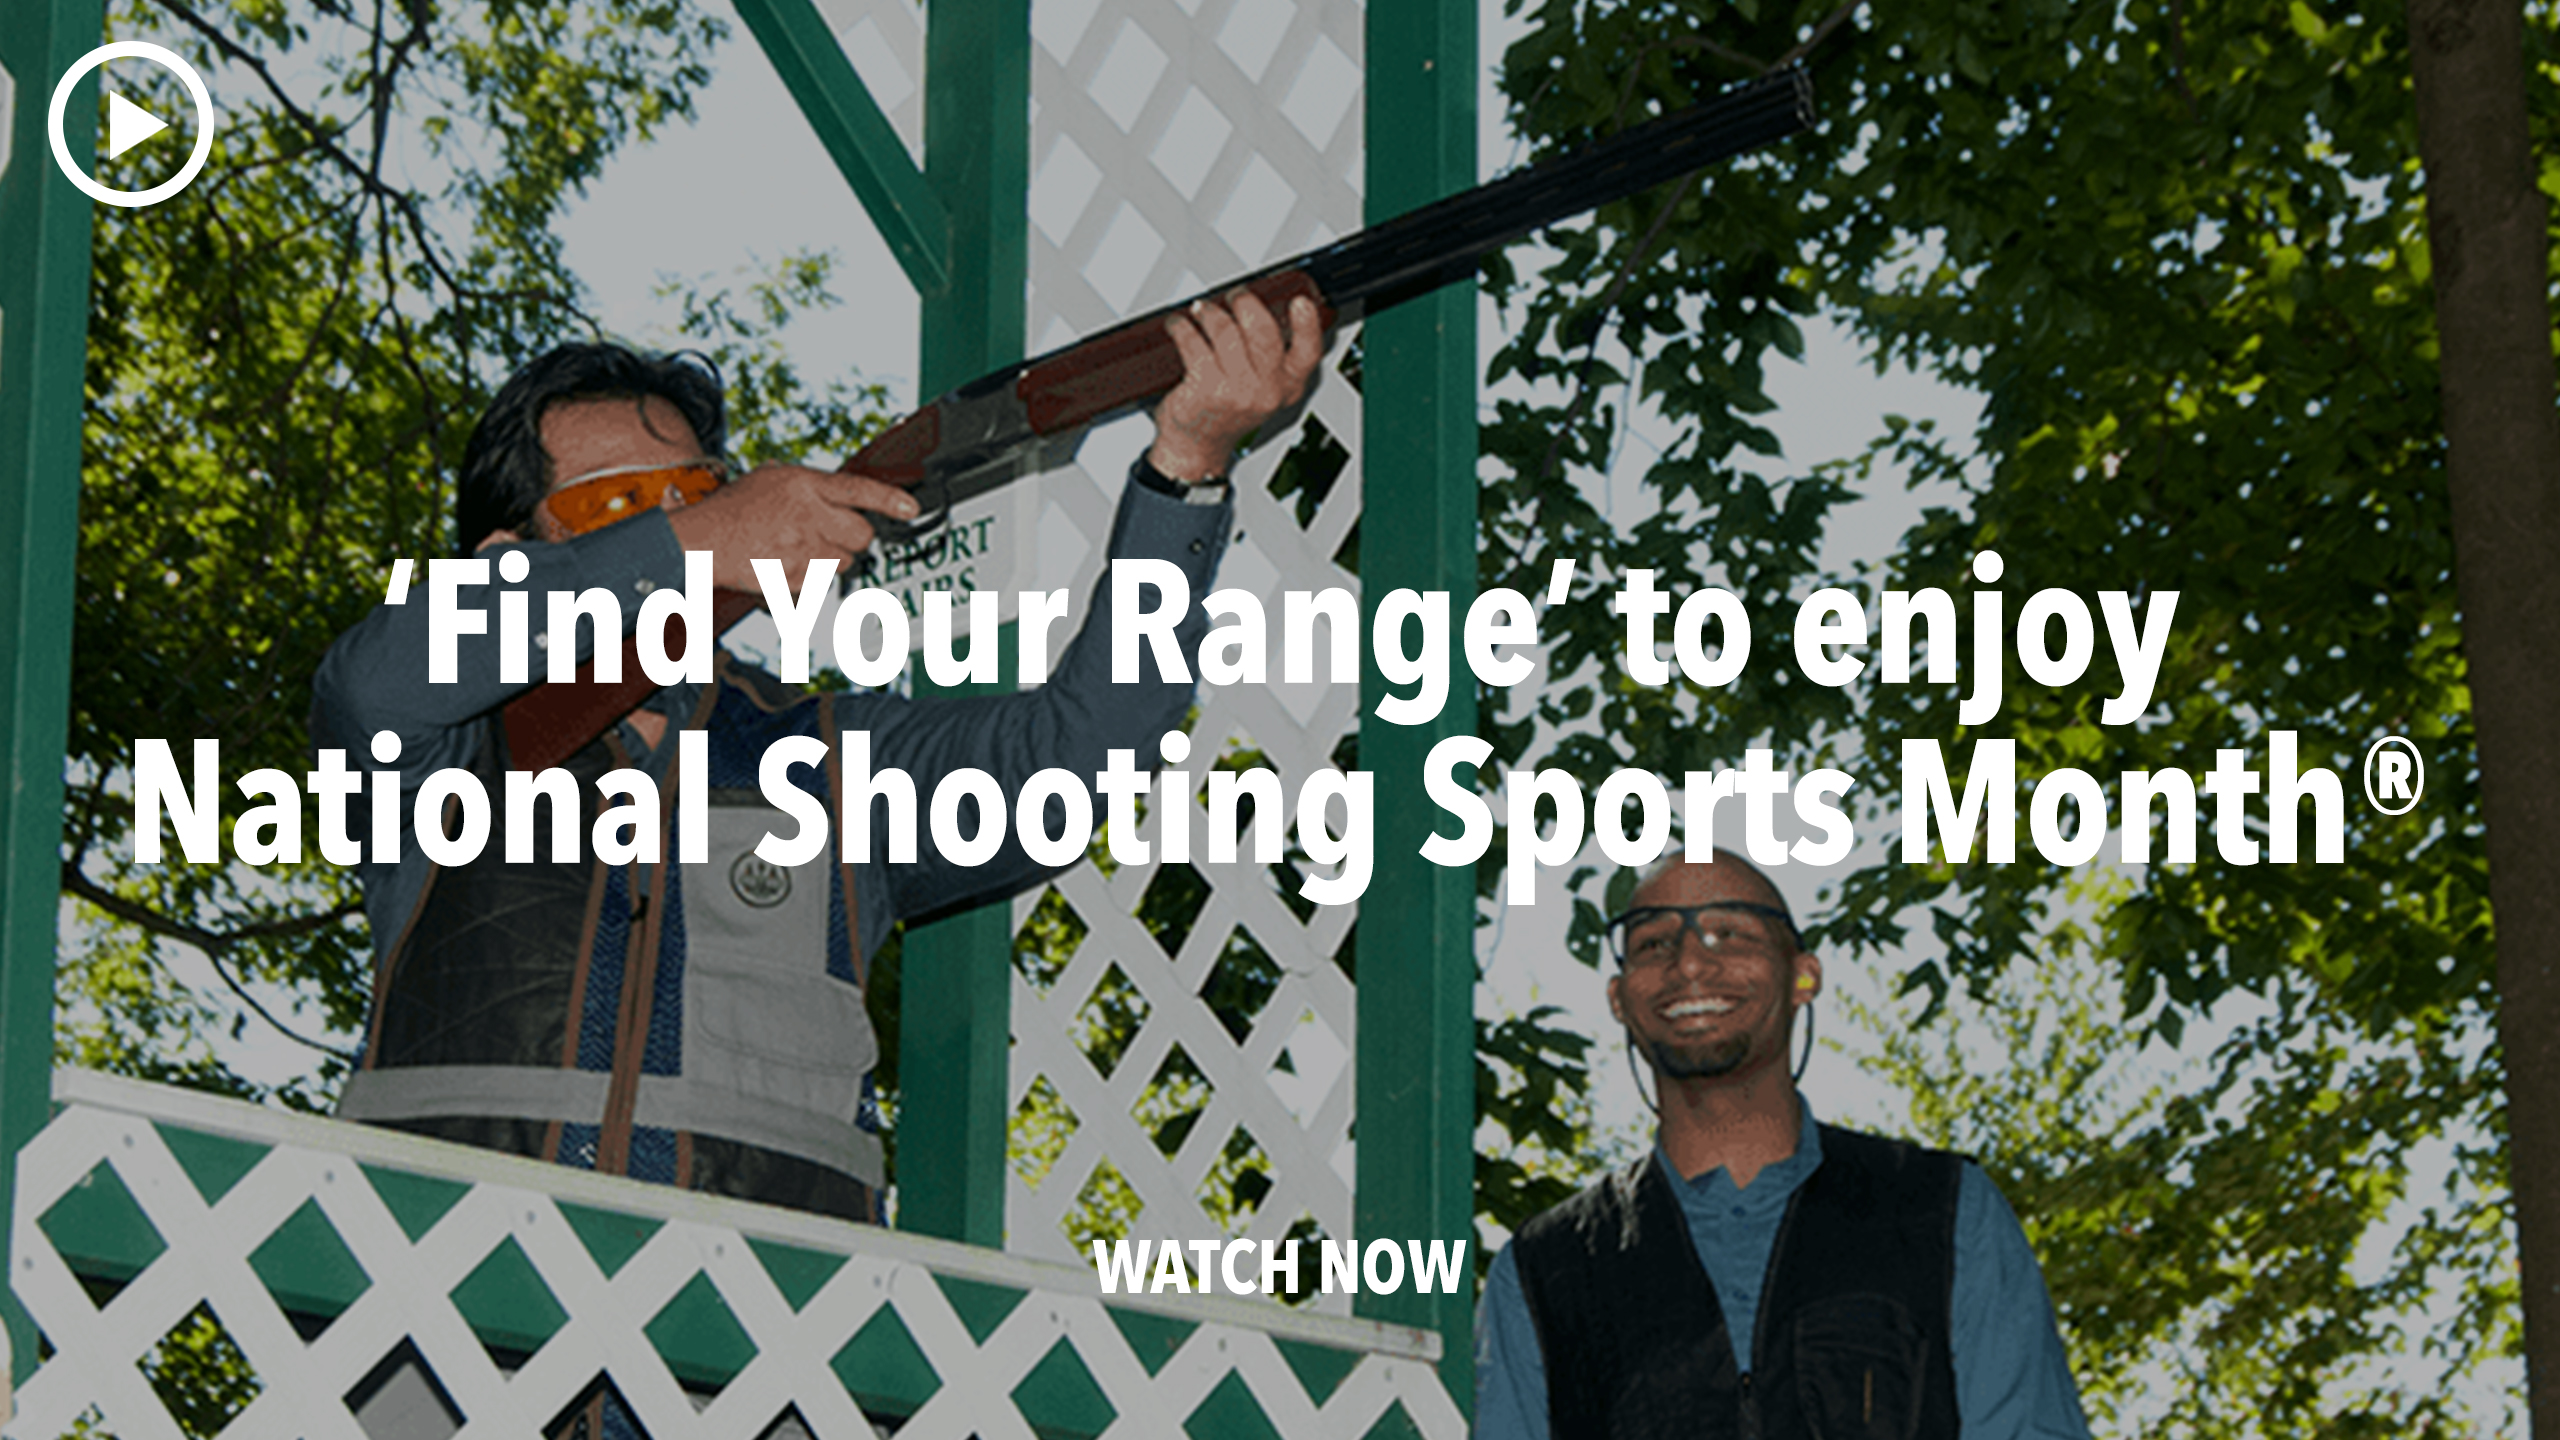 ‘Find Your Range’ to enjoy National Shooting Sports Month